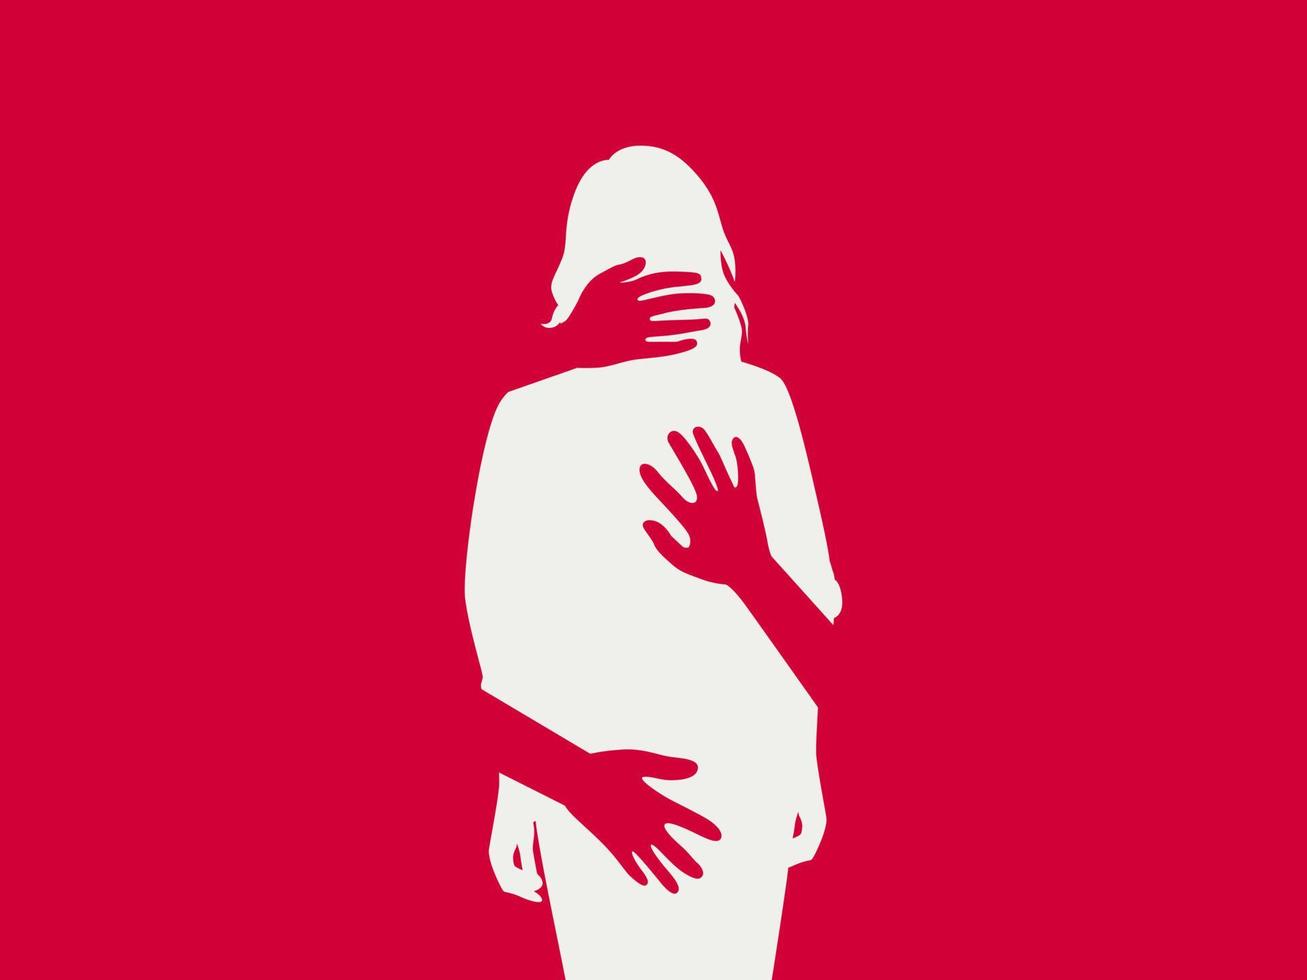 Silhouette of woman, harassment vector illustration. hands touching women. Violence against women, Workplace bullying concept. flat concept